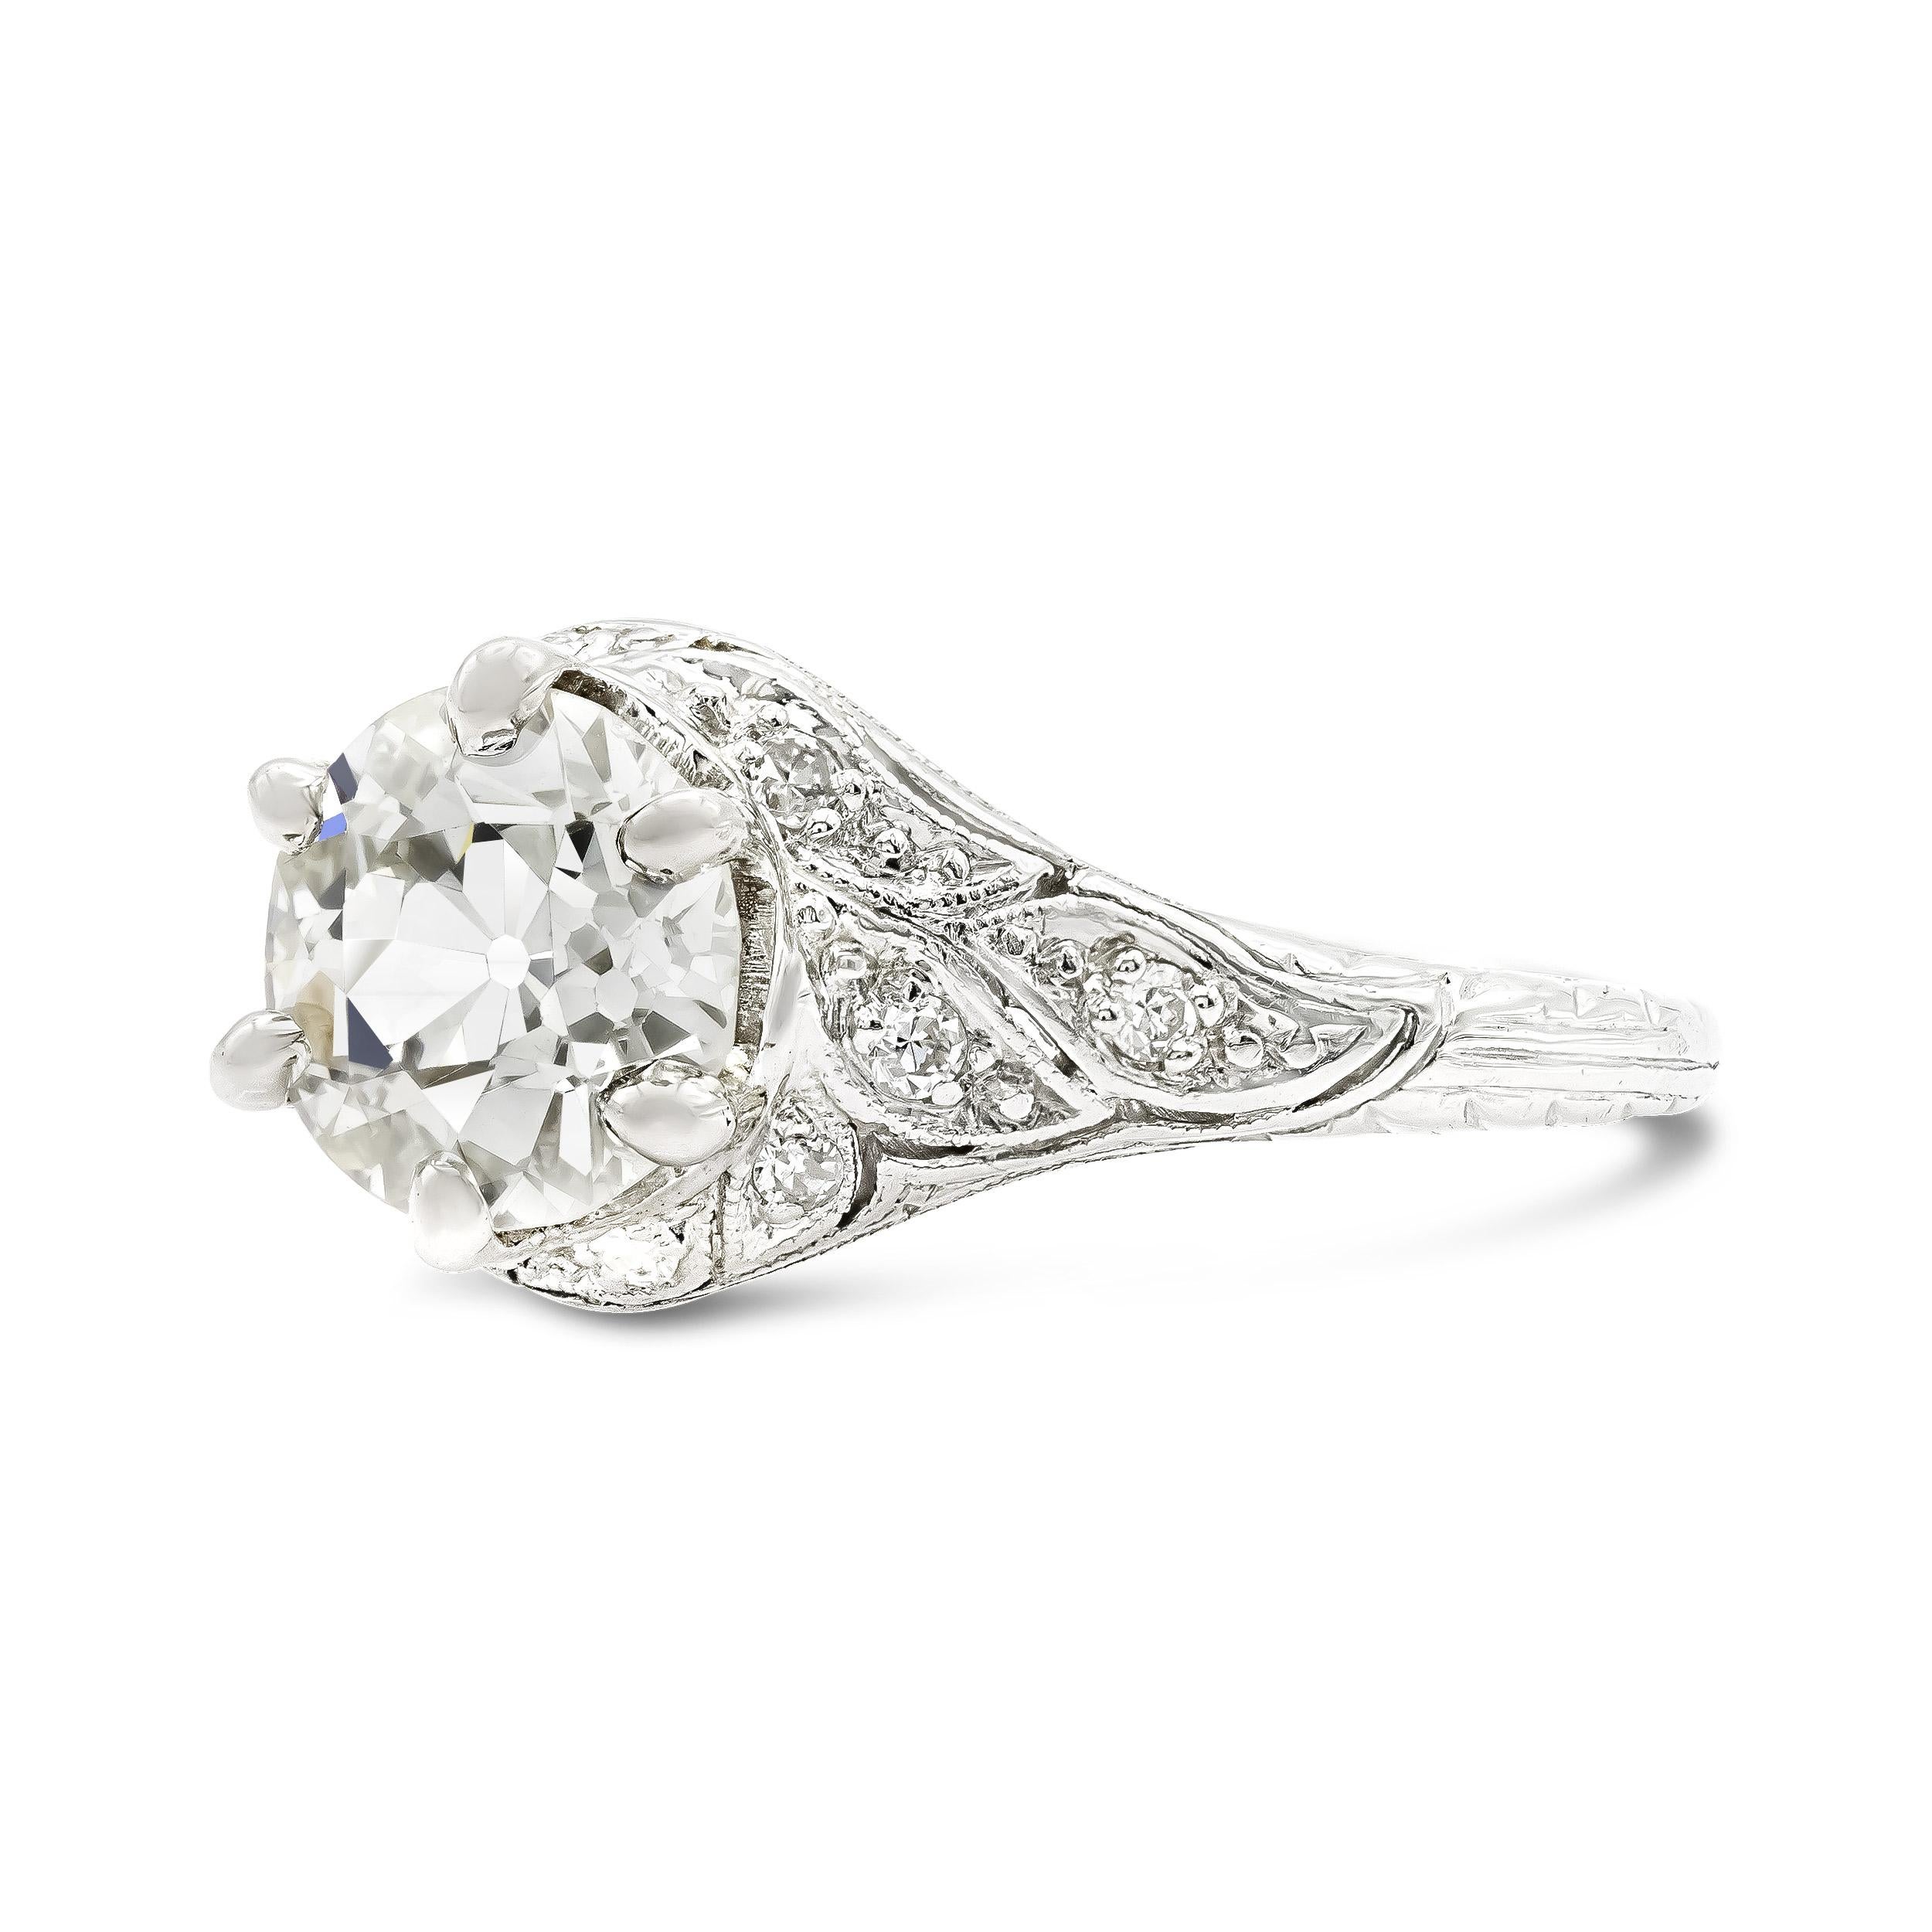 There is nothing like the delicate craftsmanship present in art deco era engagement rings. This antique setting has all the old world charm we love. A 1.35 carat old European cut diamond centers in a six prong basket, its open culet and flickering